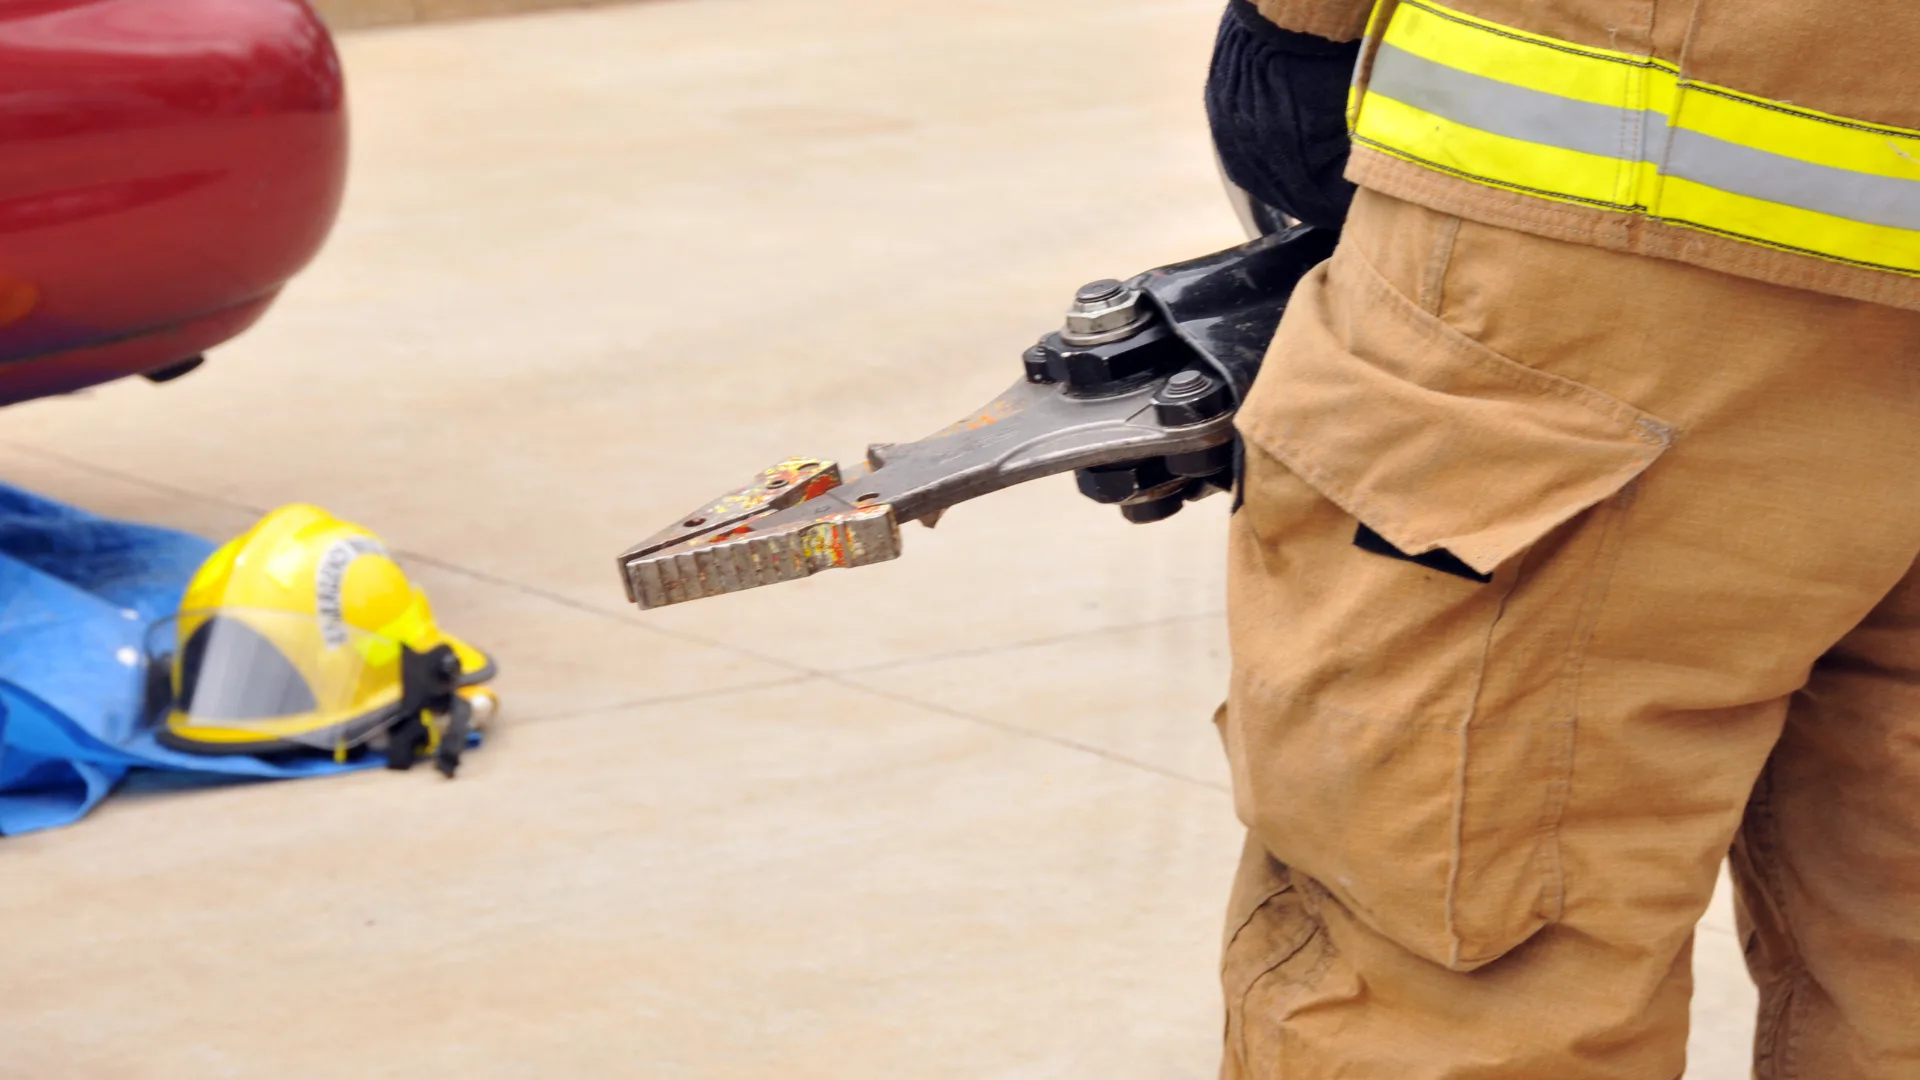 Fireman using the Jaws of Life